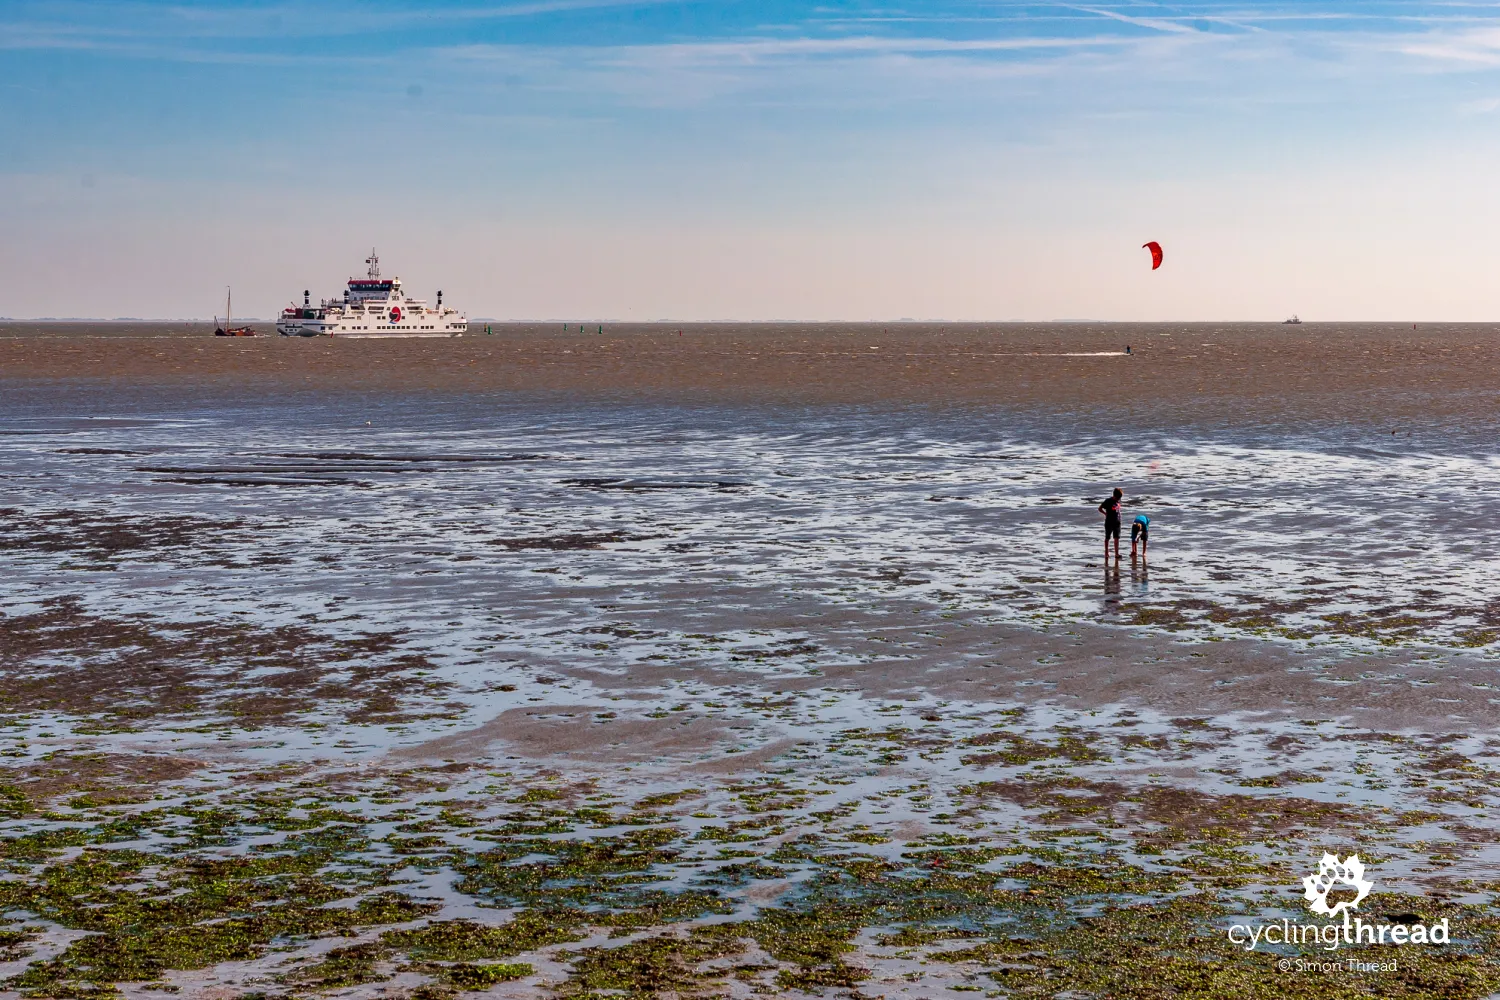 The Wadden Sea in the Netherlands